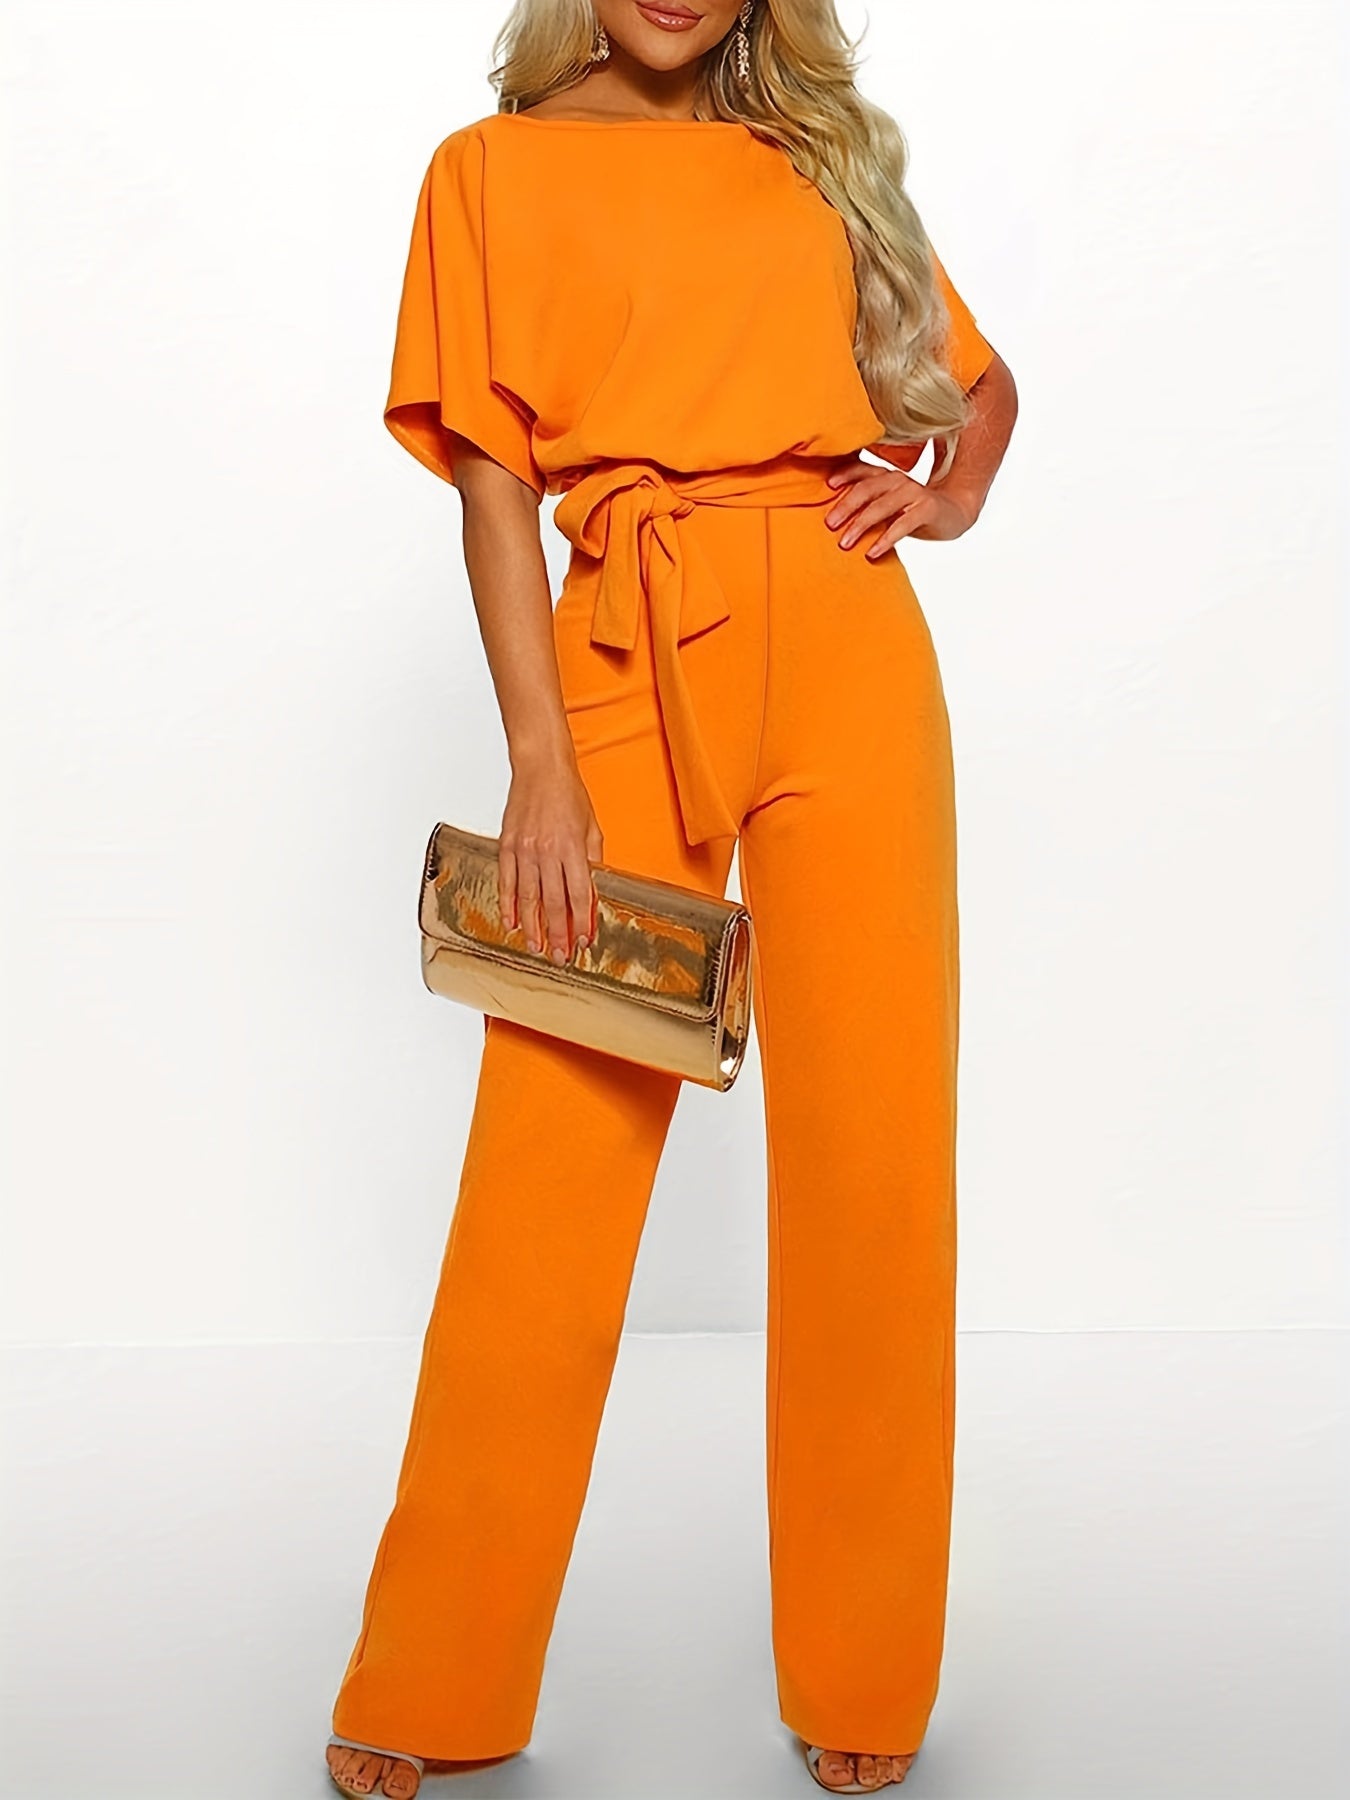 Tie Waist Straight Leg Jumpsuit, Casual Short Sleeve Jumpsuit For Spring & Summer, Women's Clothing